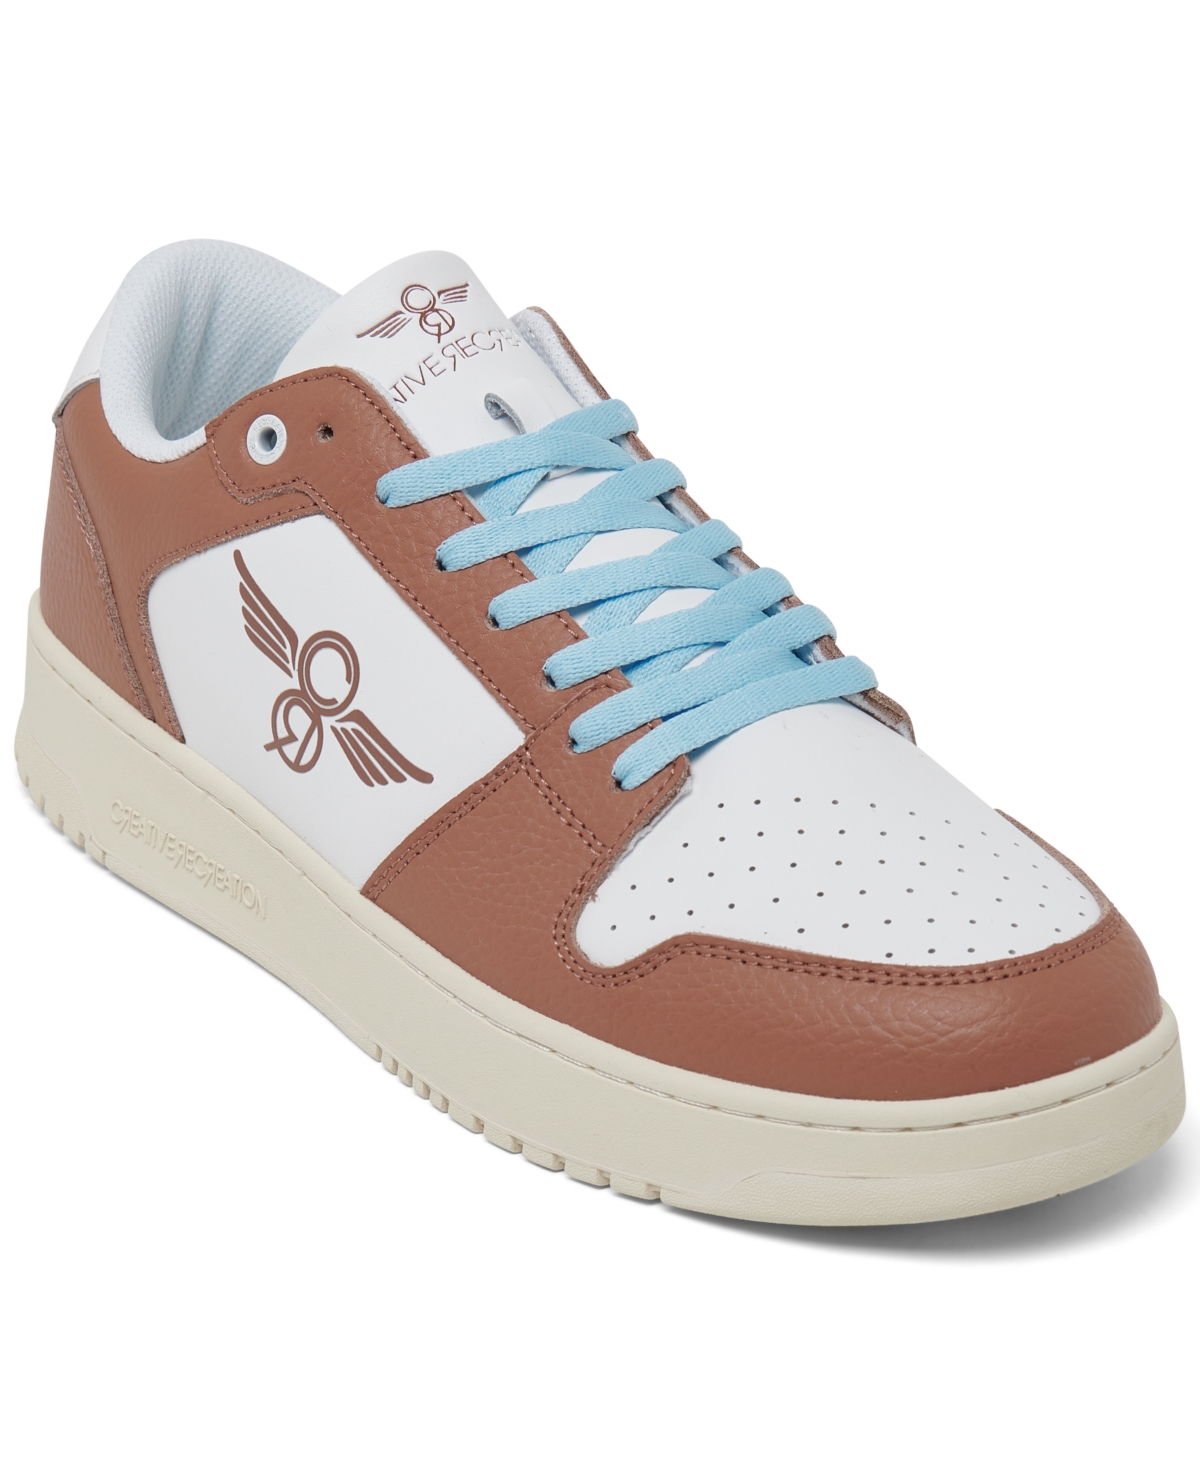 Men's Dion Low Casual Sneakers from Finish Line - Pecan, Aqua, White